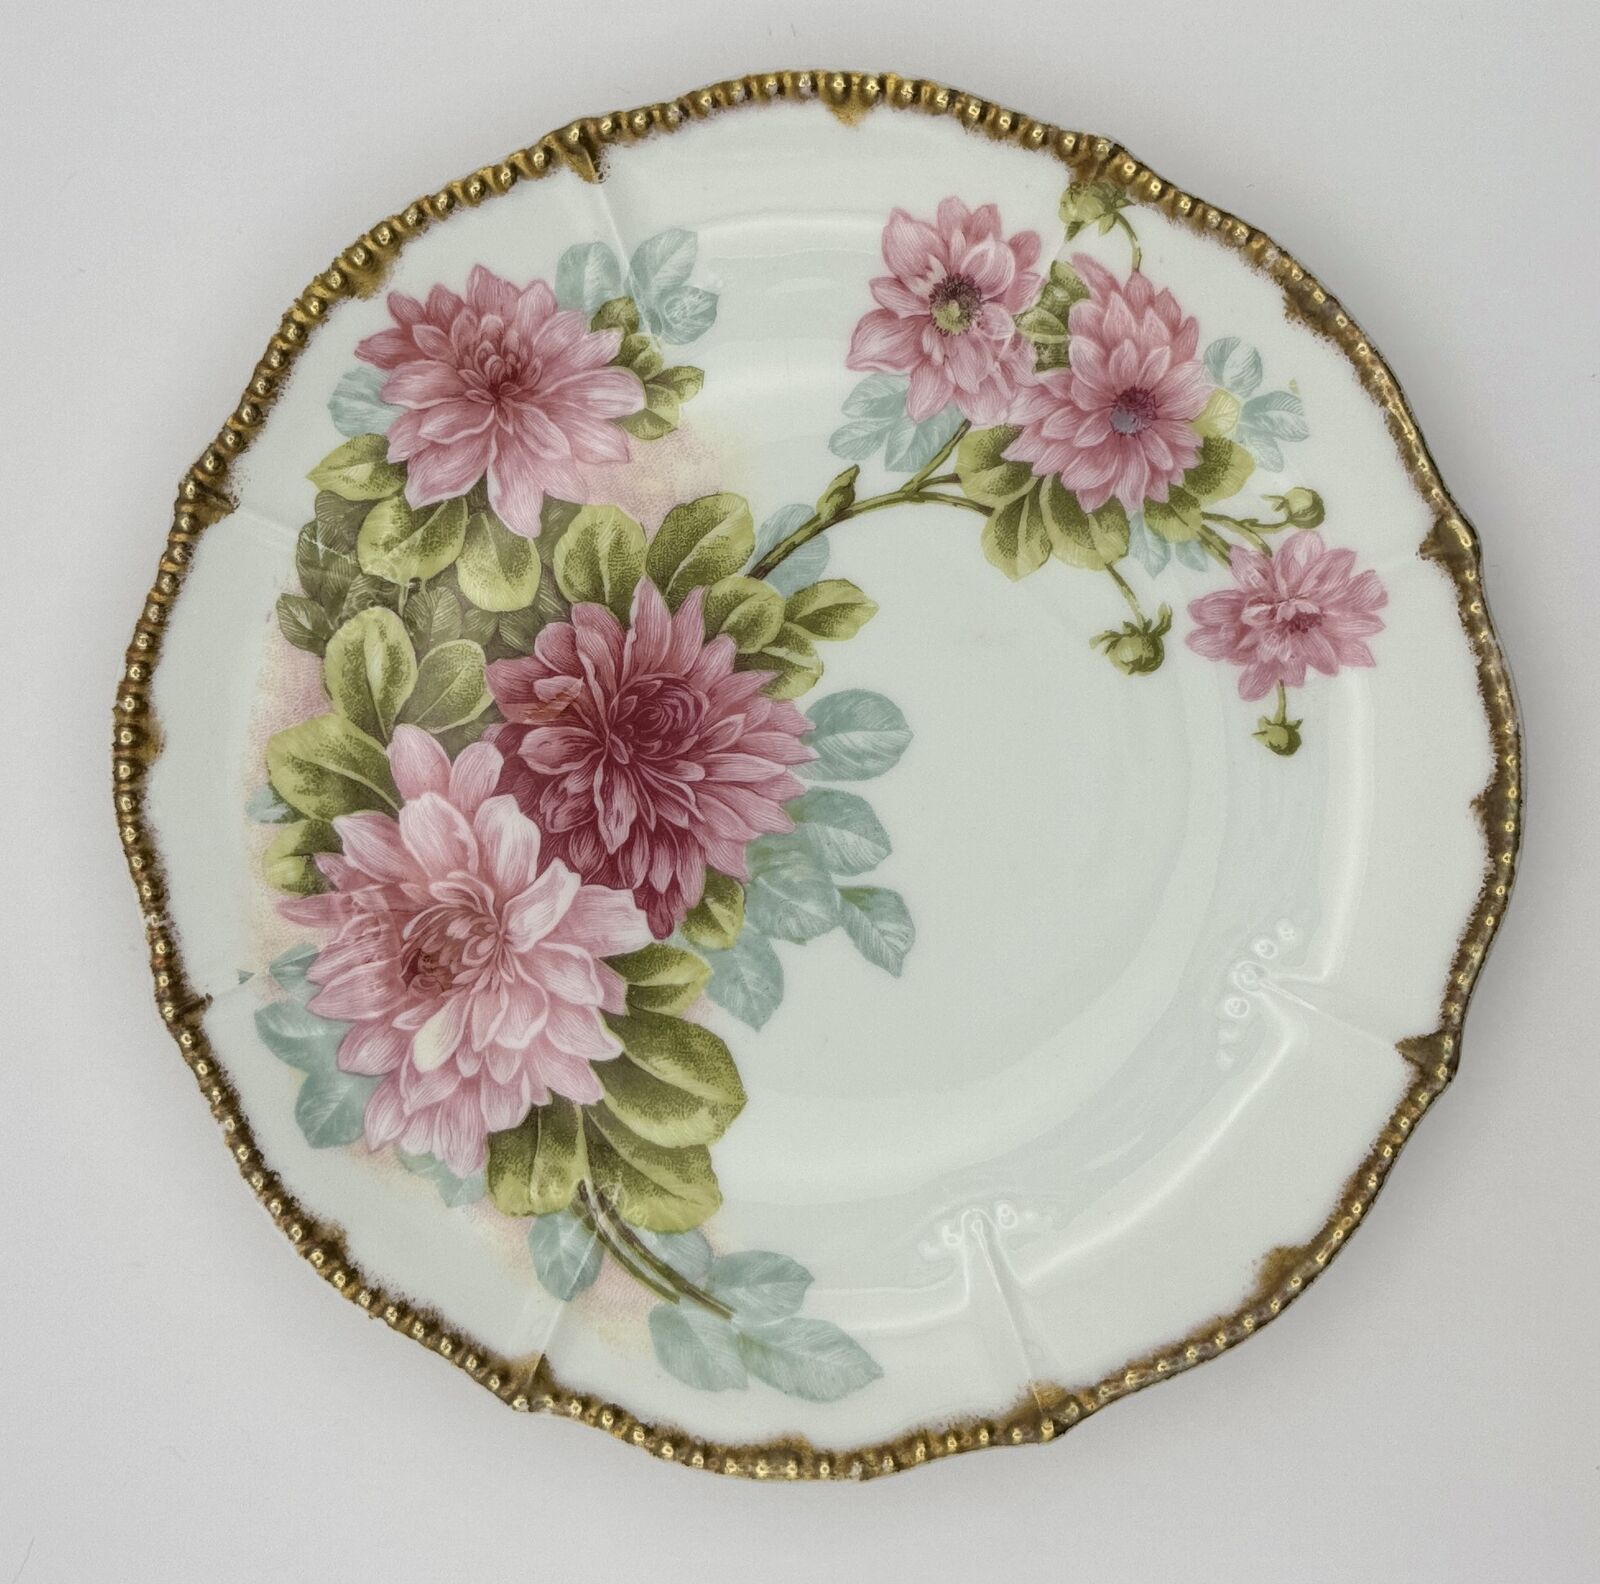 Elite Works Limoges Hand-Painted Plate with Pink Floral Design & Gold Accents